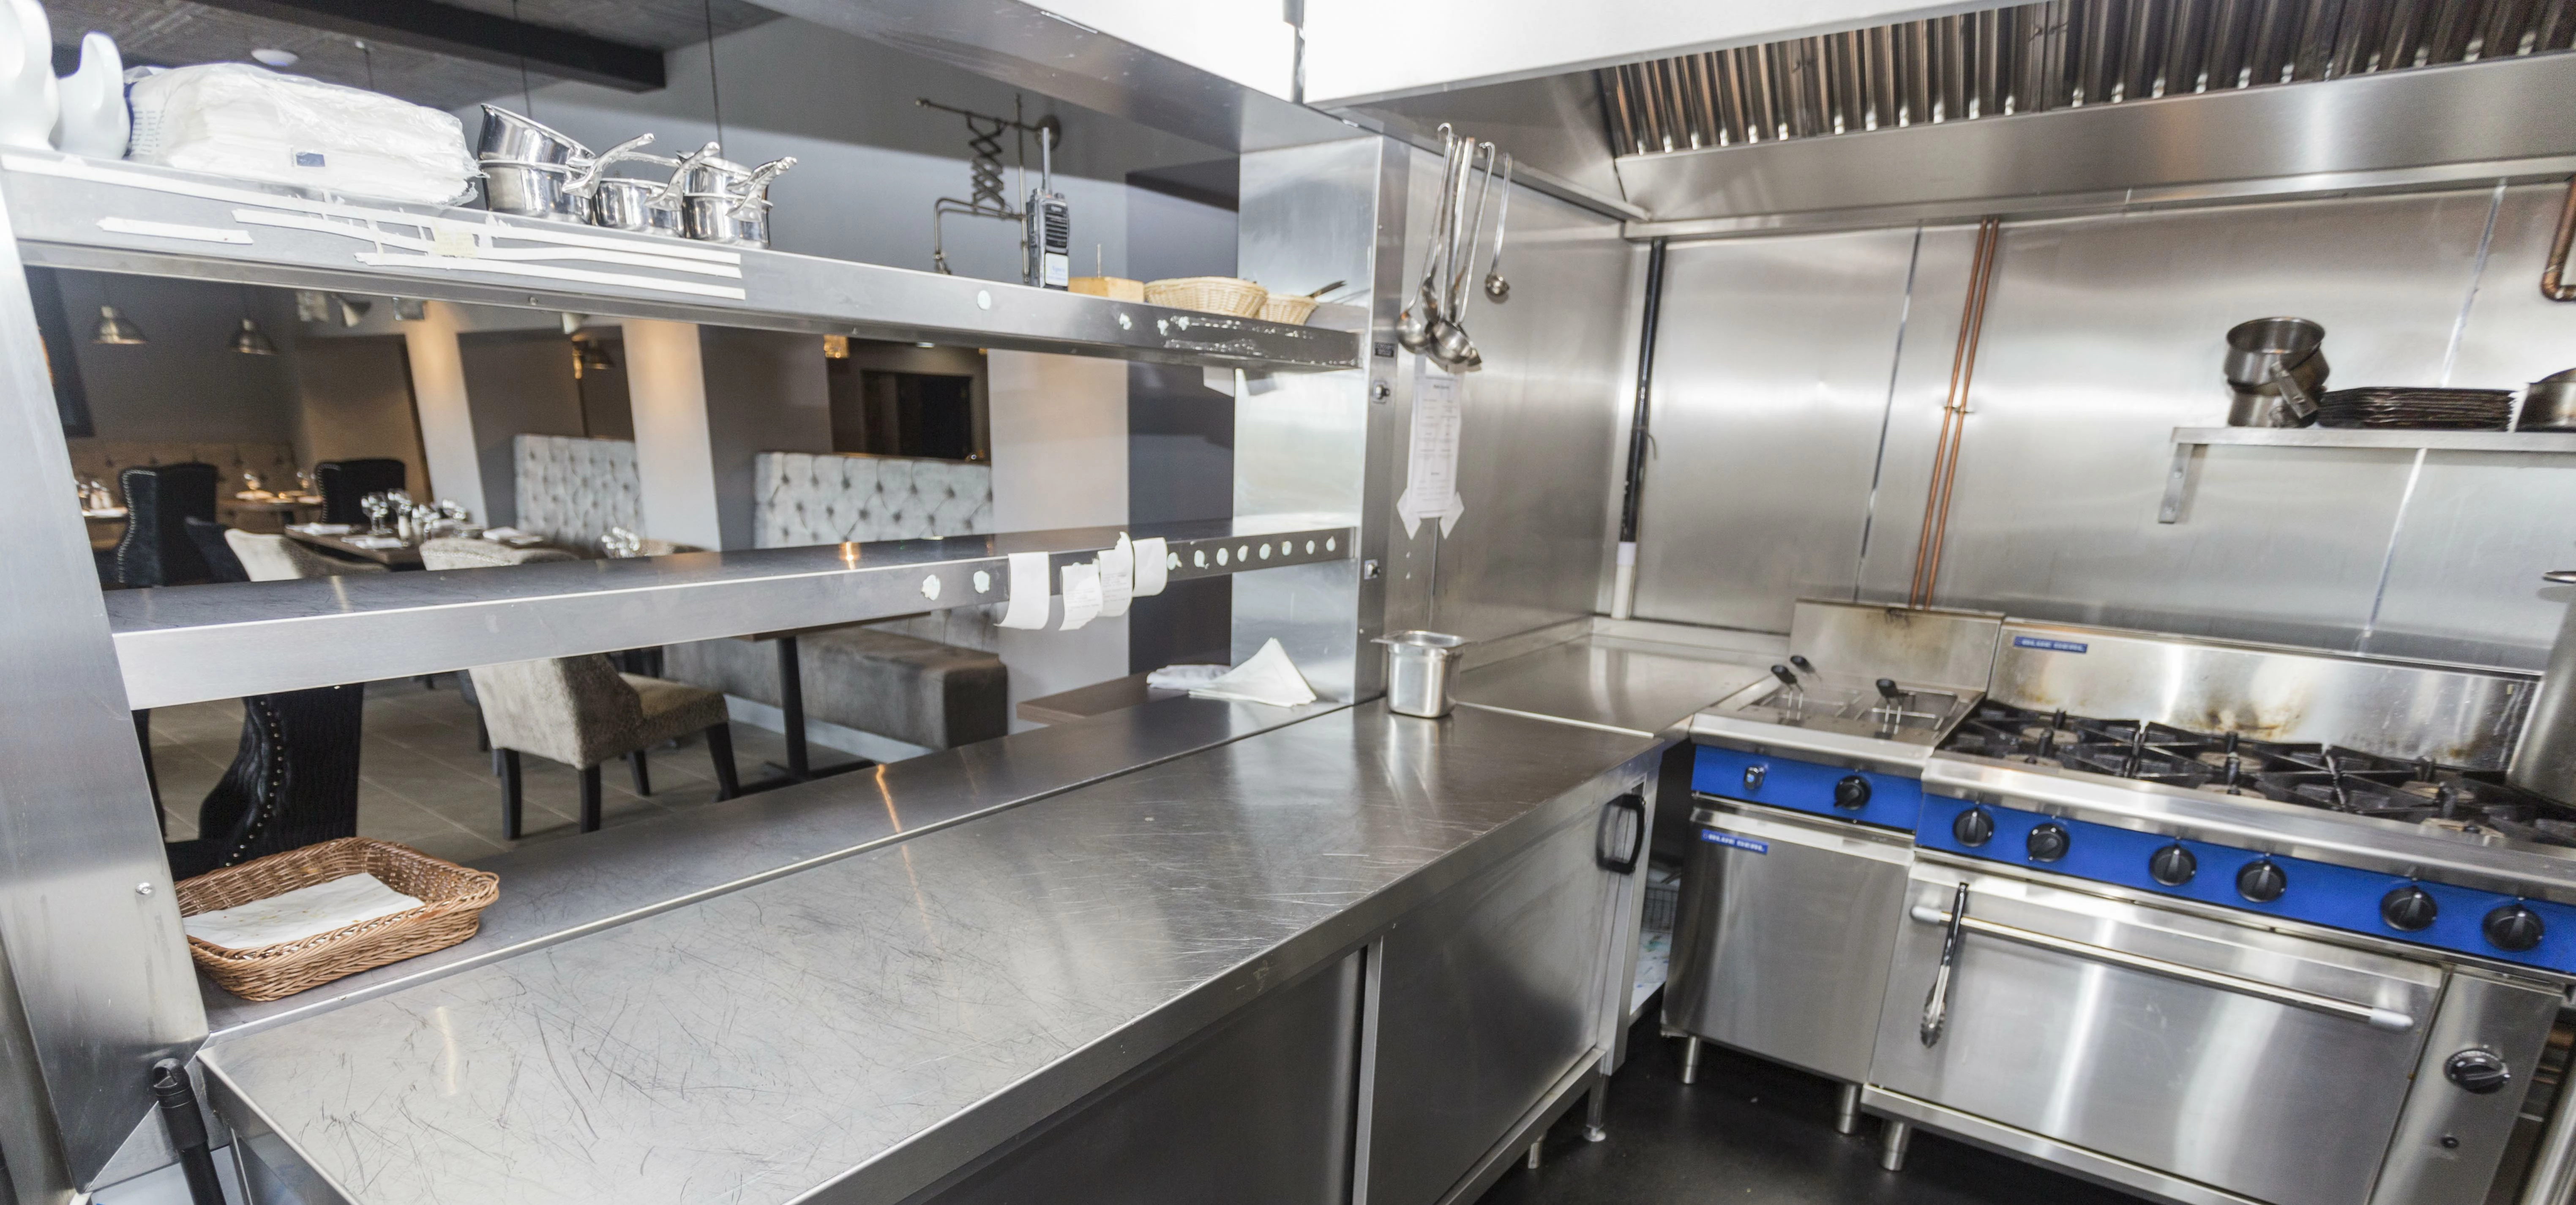 The kitchen at Derwent Manor, installed by Crosbys Catering Equipment